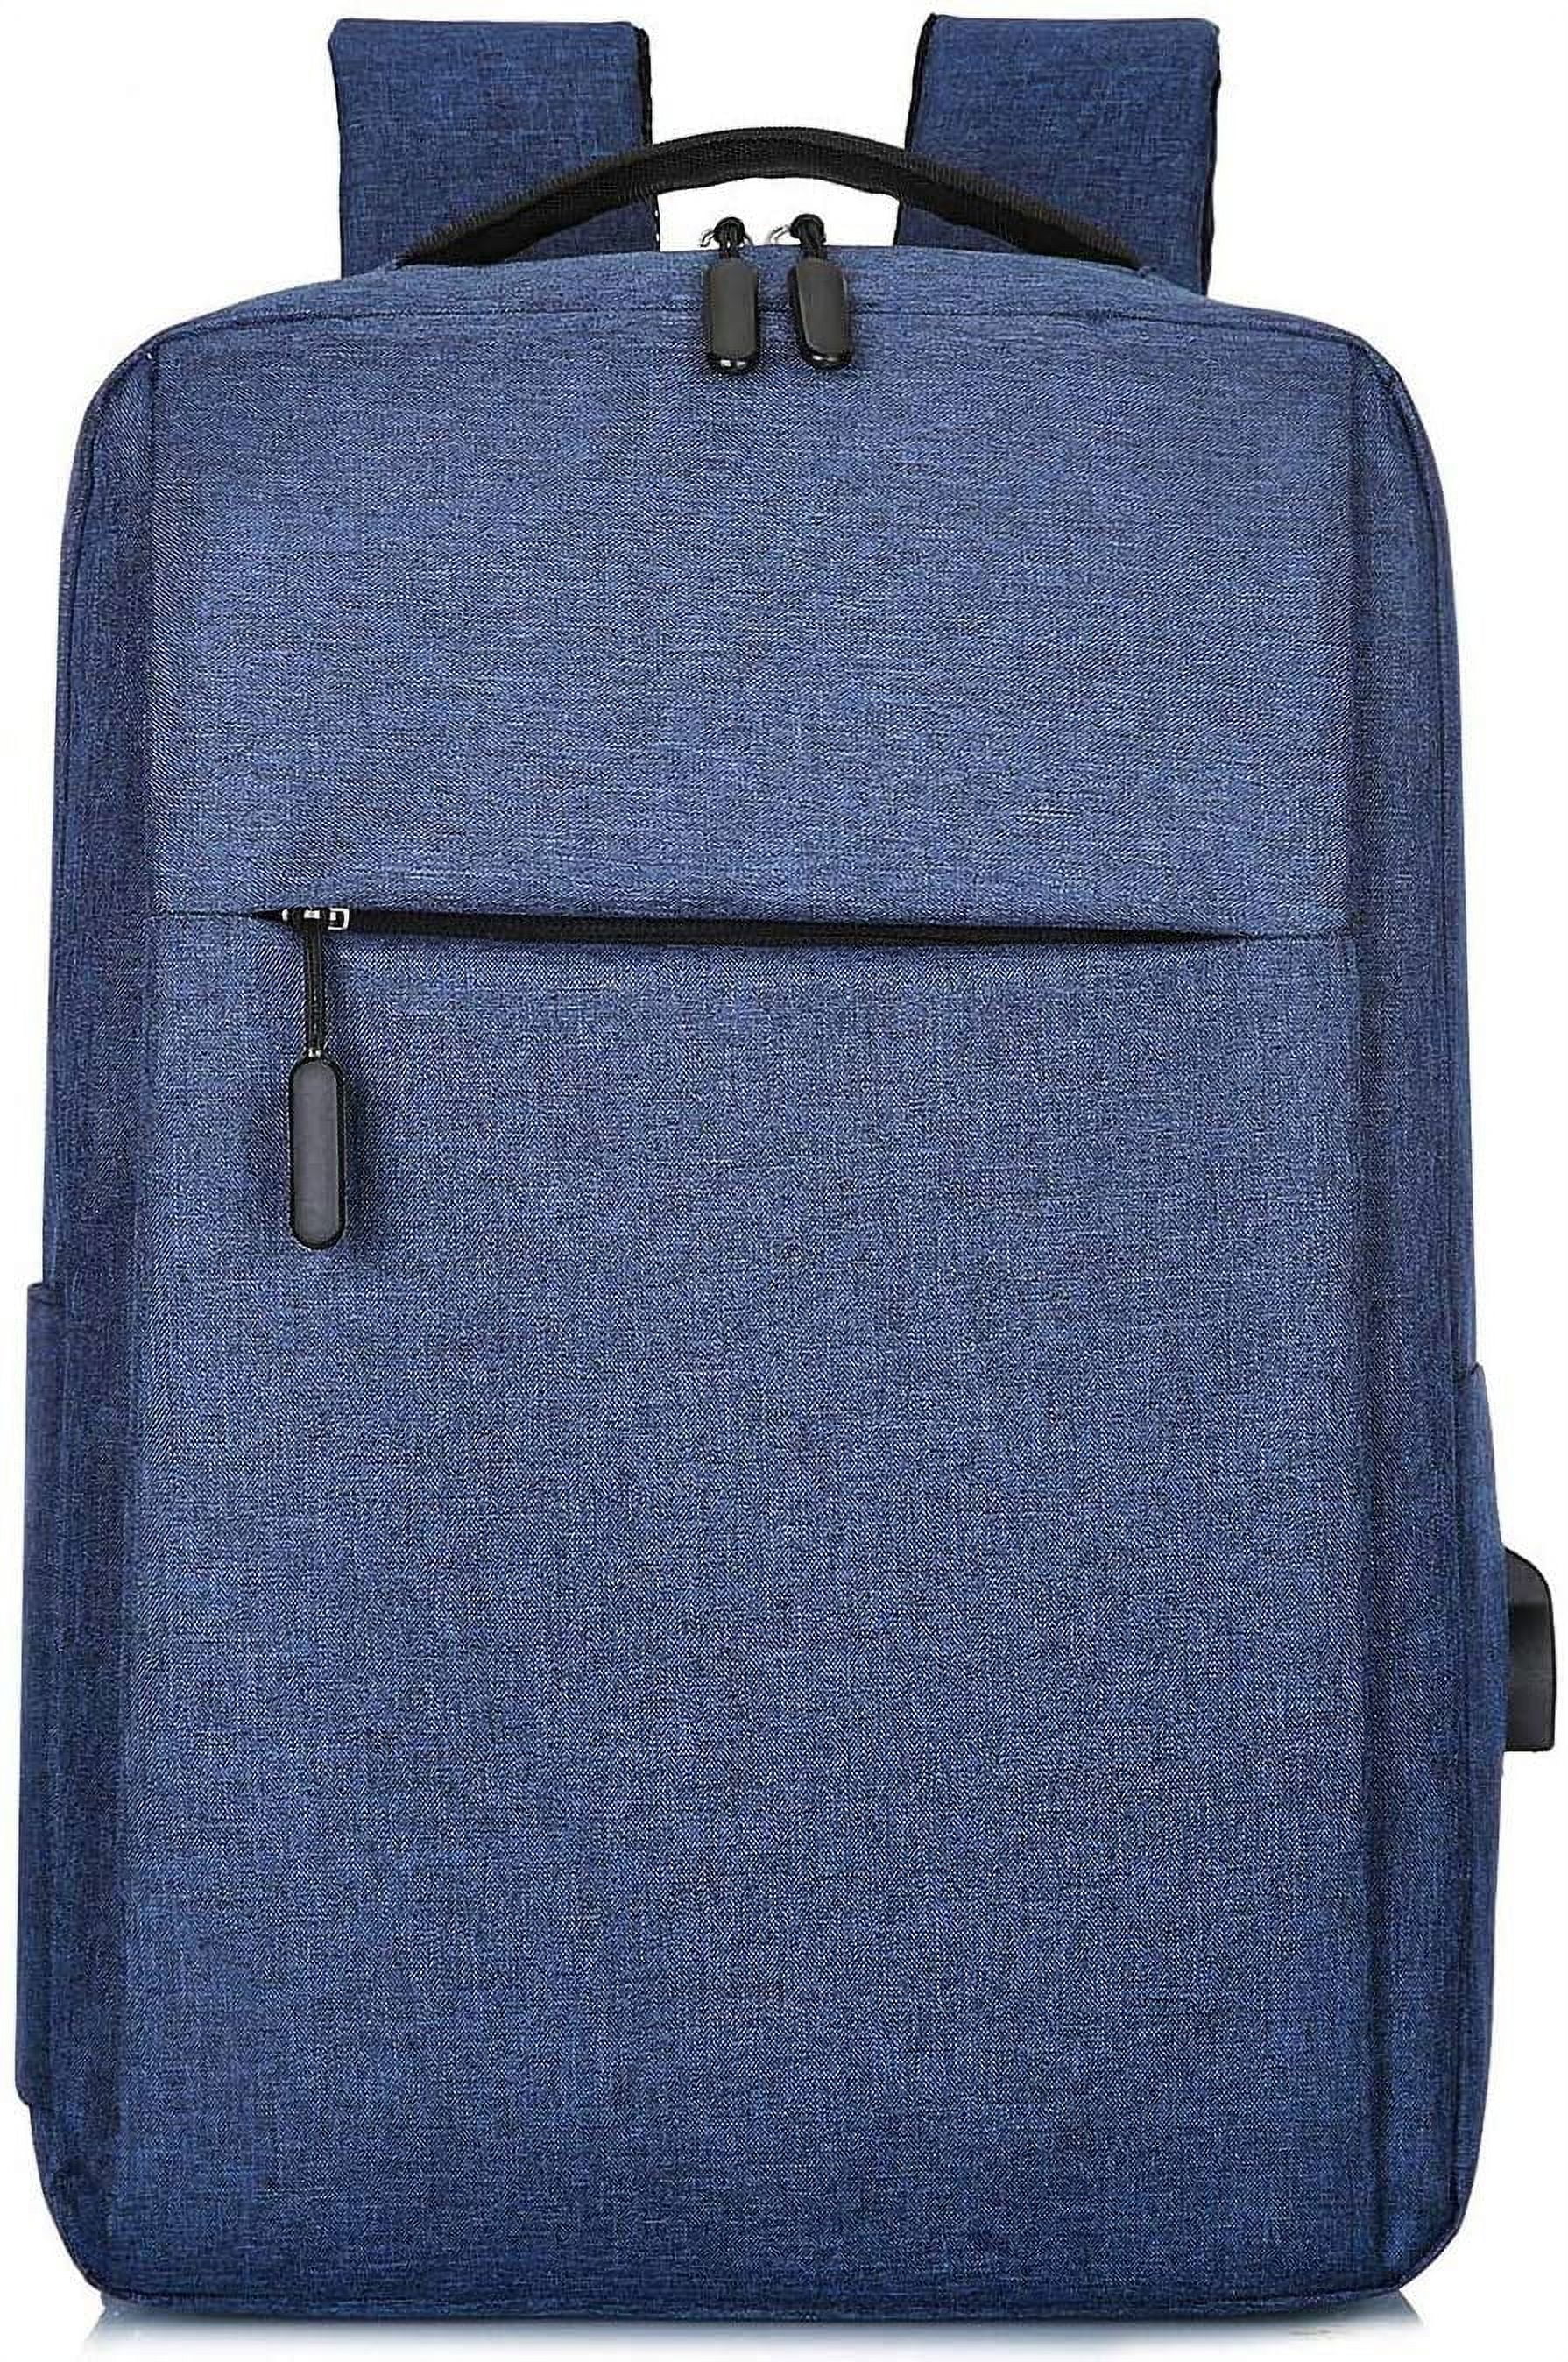 Travel Laptop Backpack, Business Slim Durable Laptops Backpack with USB ...